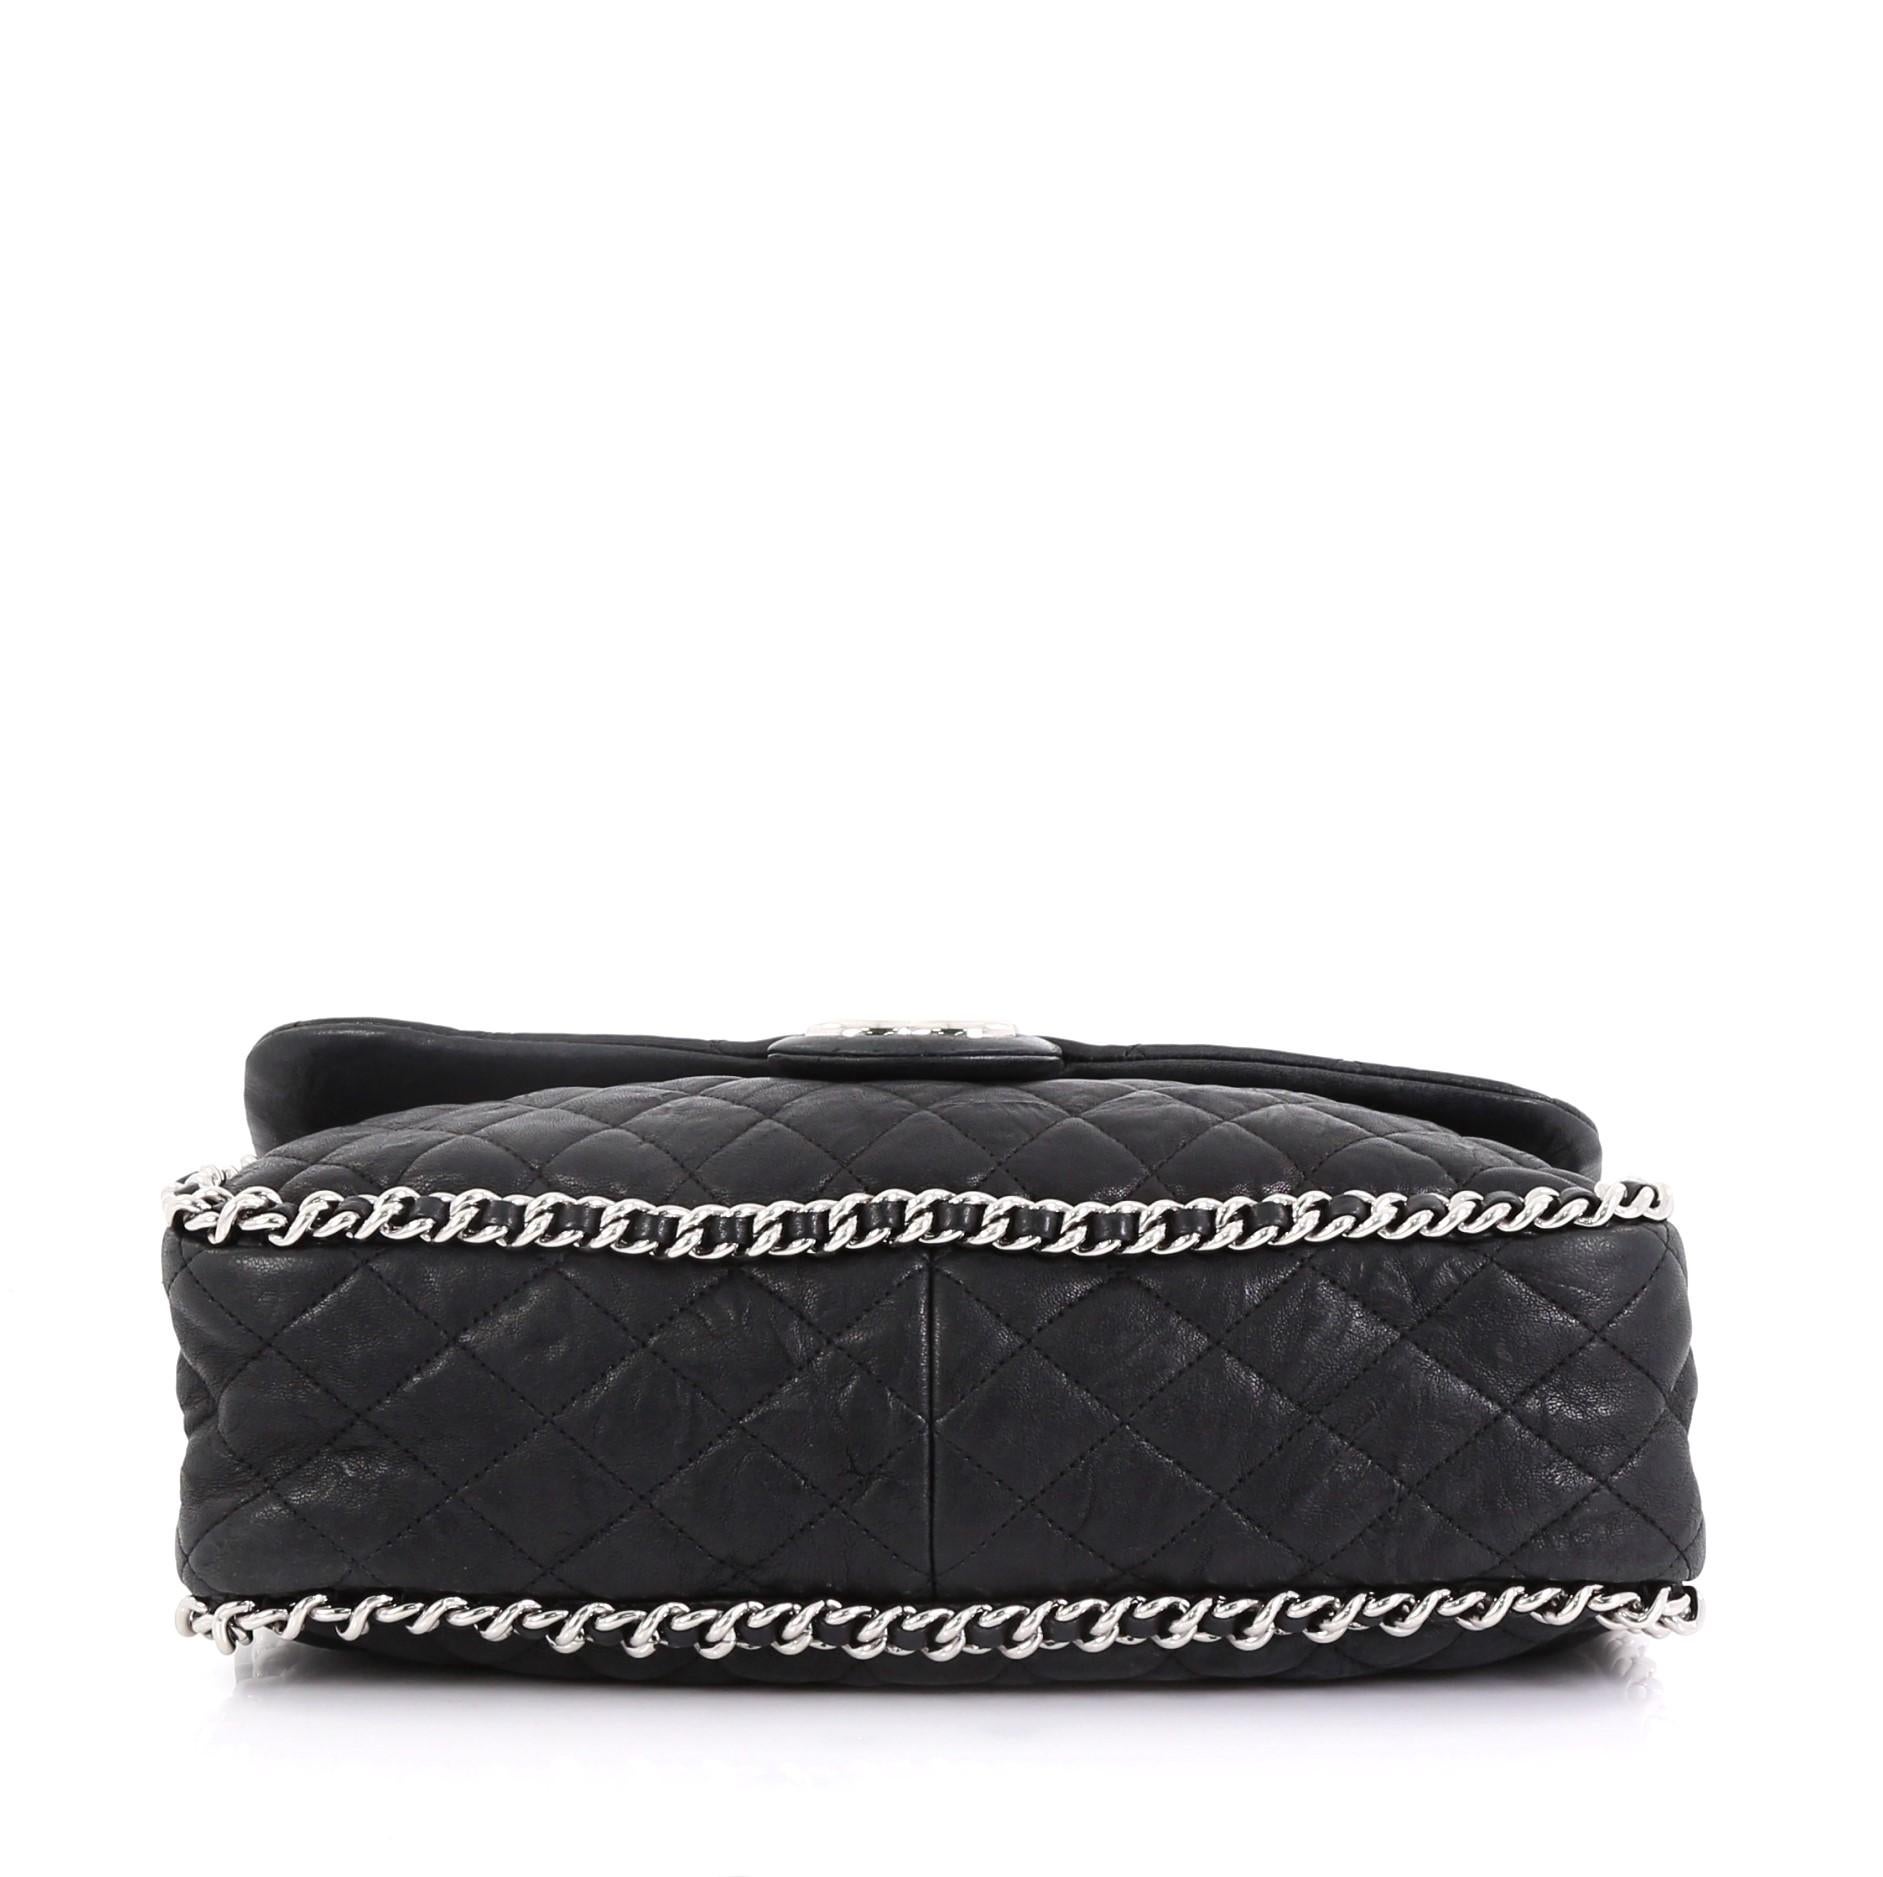 Black Chanel Chain Around Flap Bag Quilted Leather Maxi